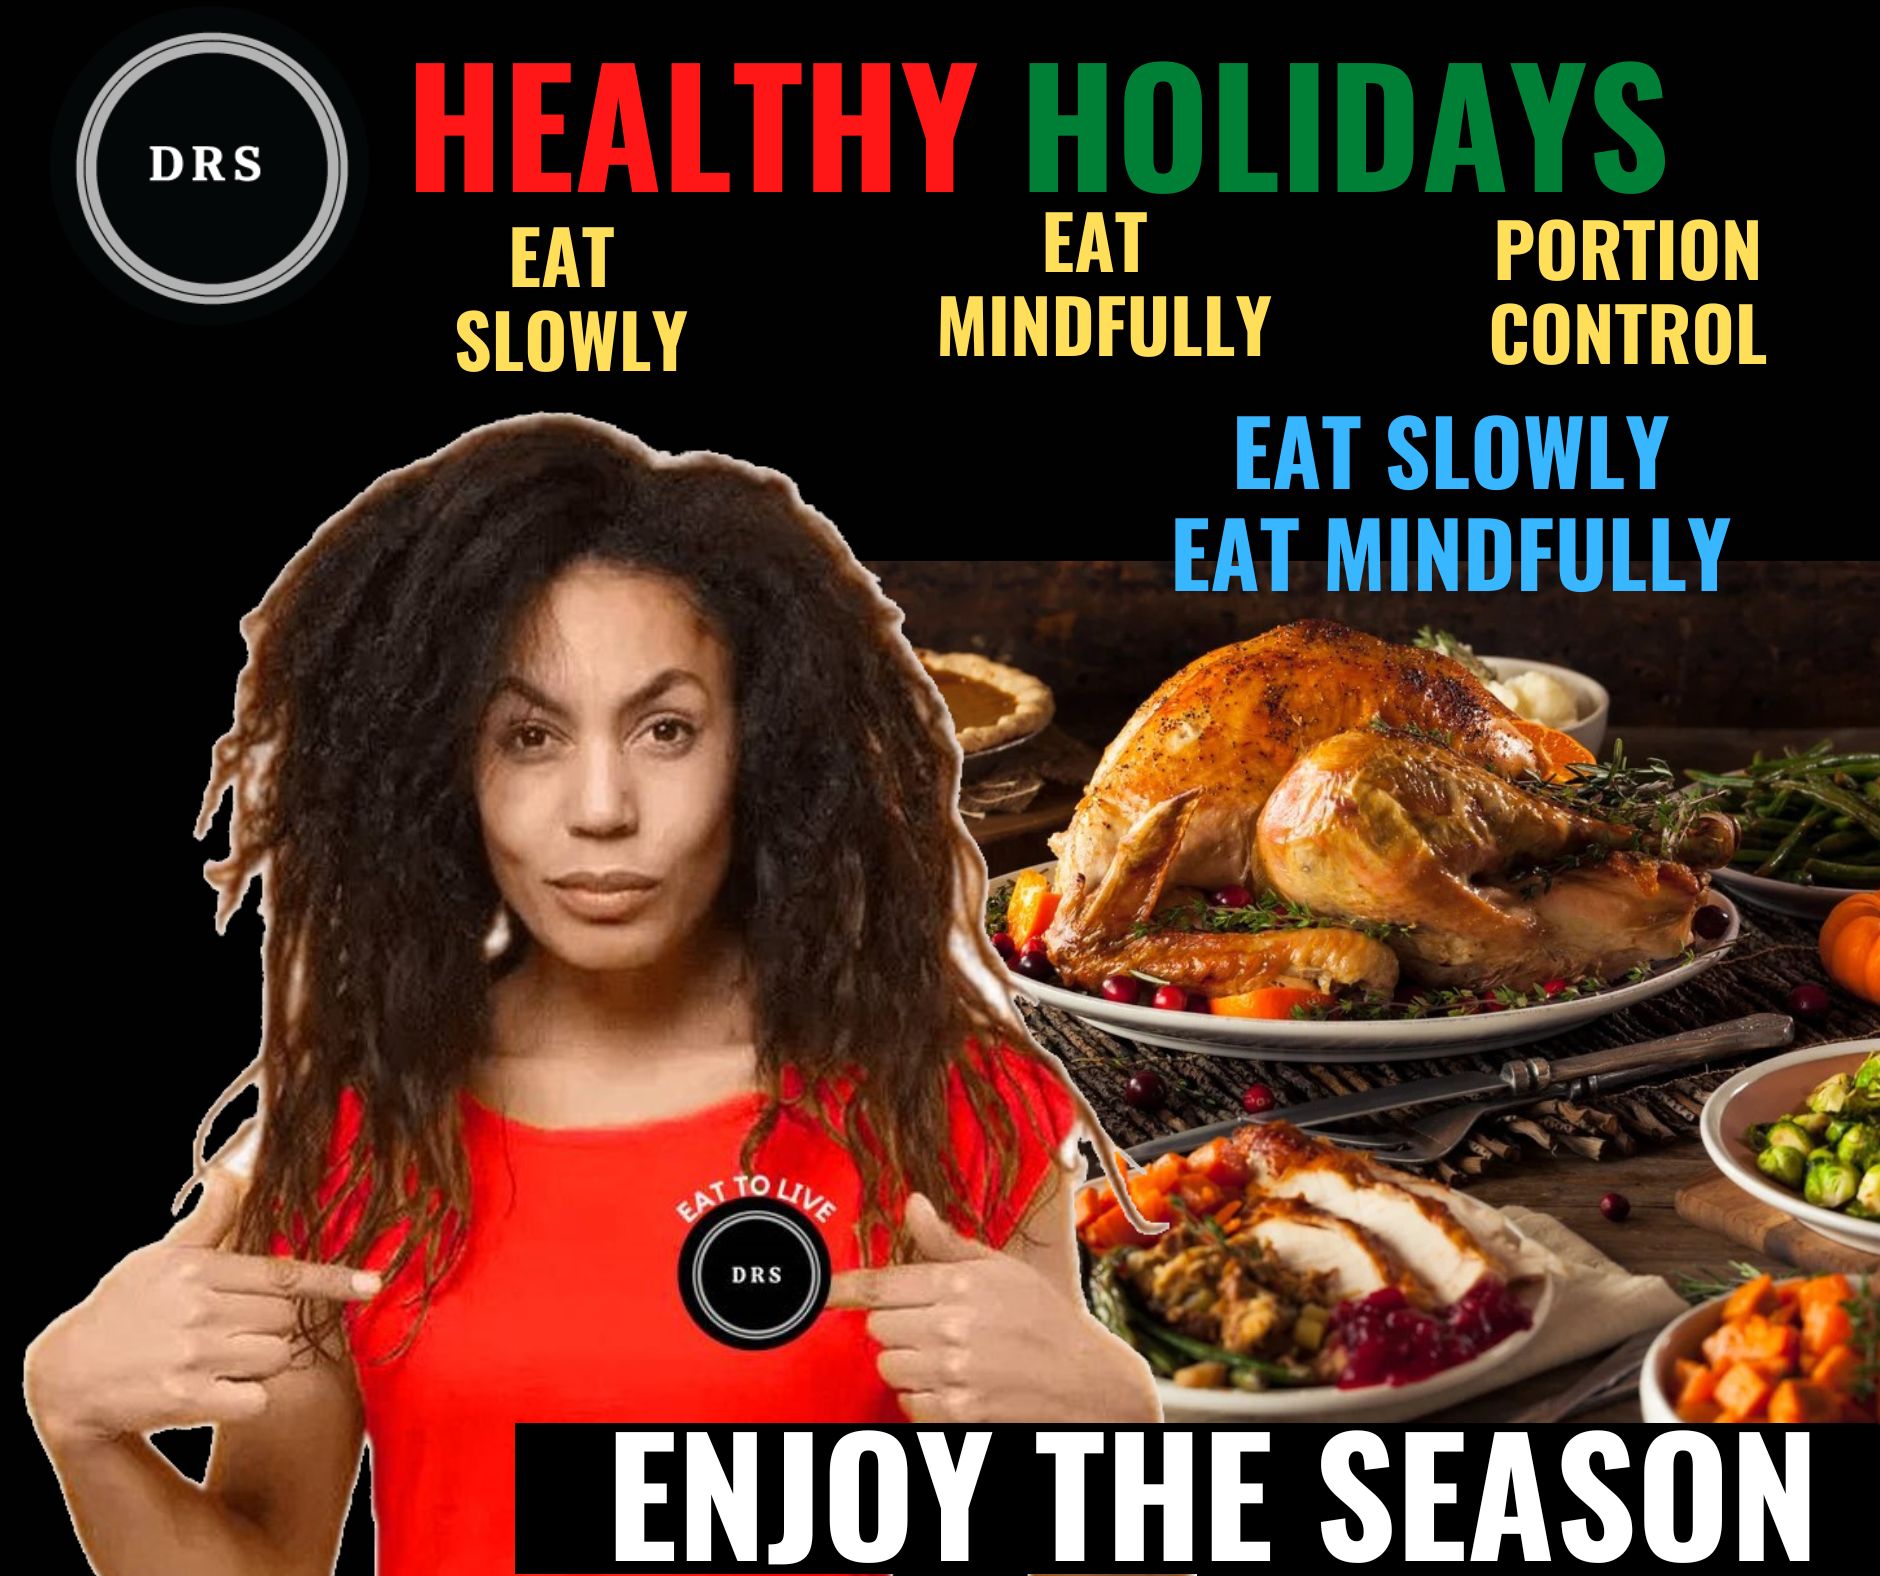 Healthy Eating Holiday Advice